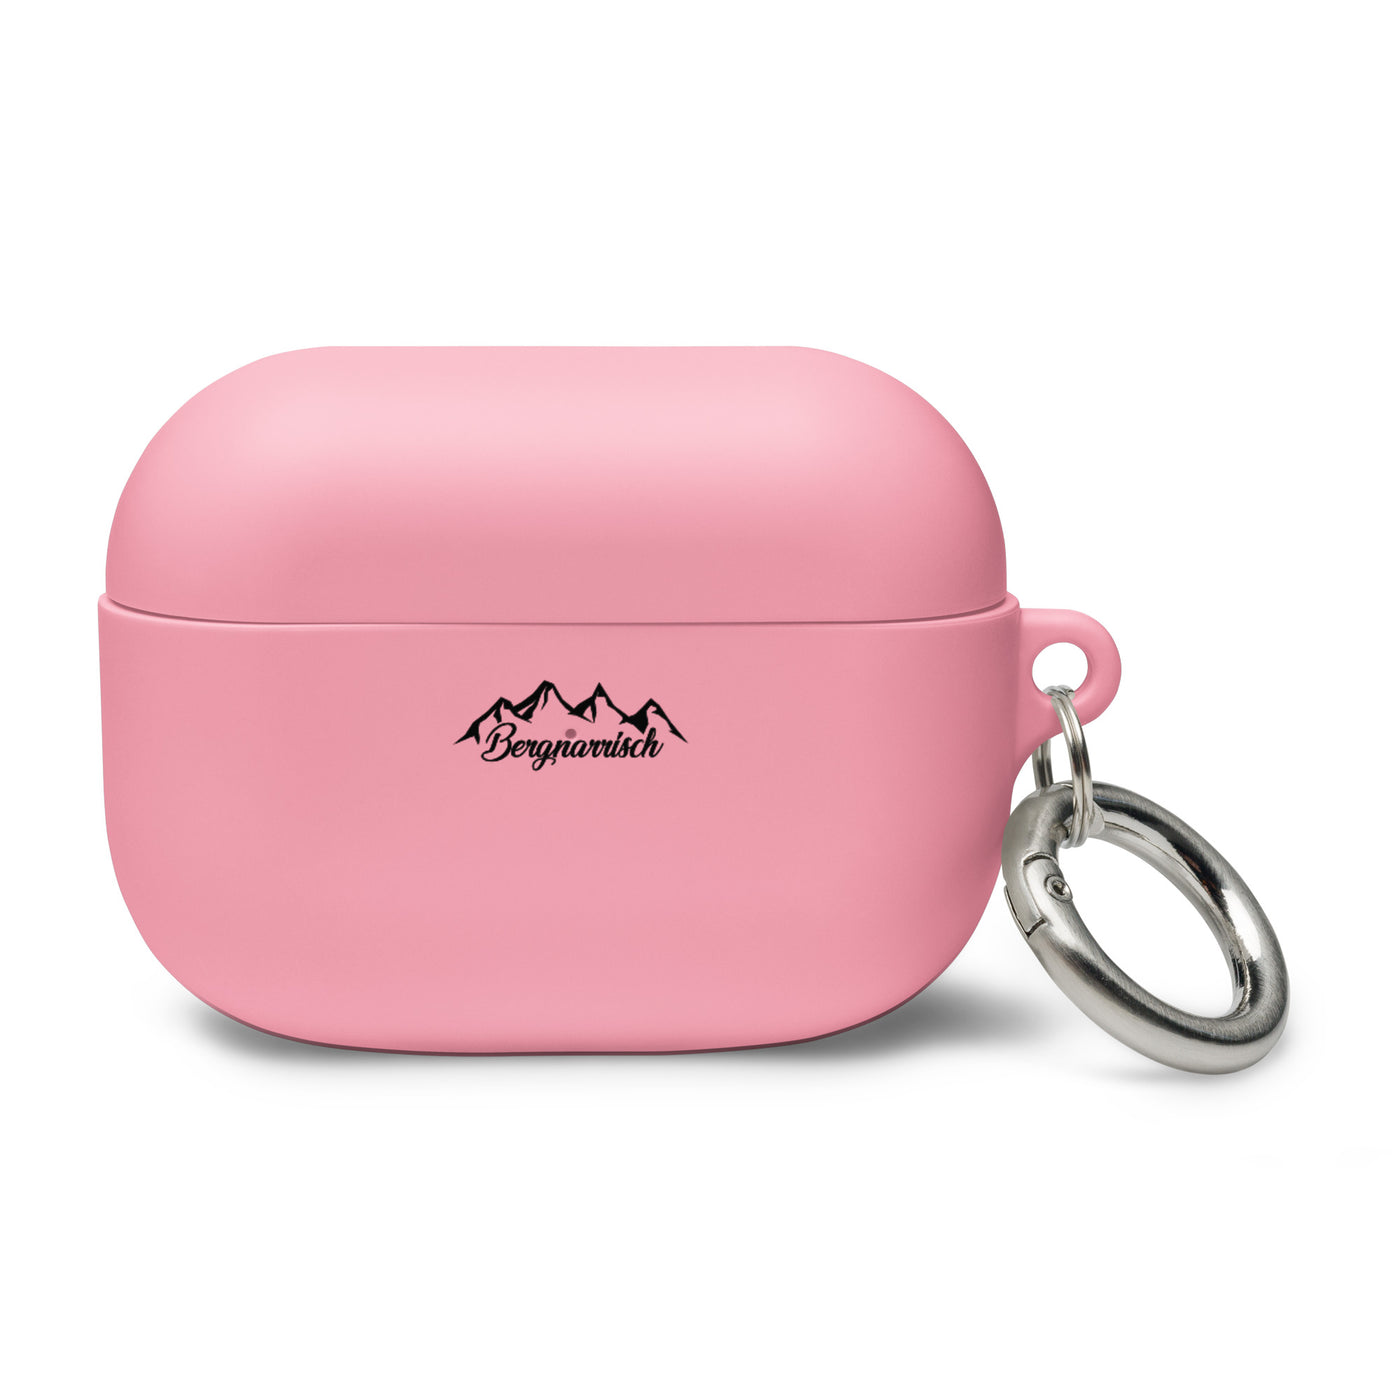 Bergnarrisch - AirPods Case berge Pink AirPods Pro